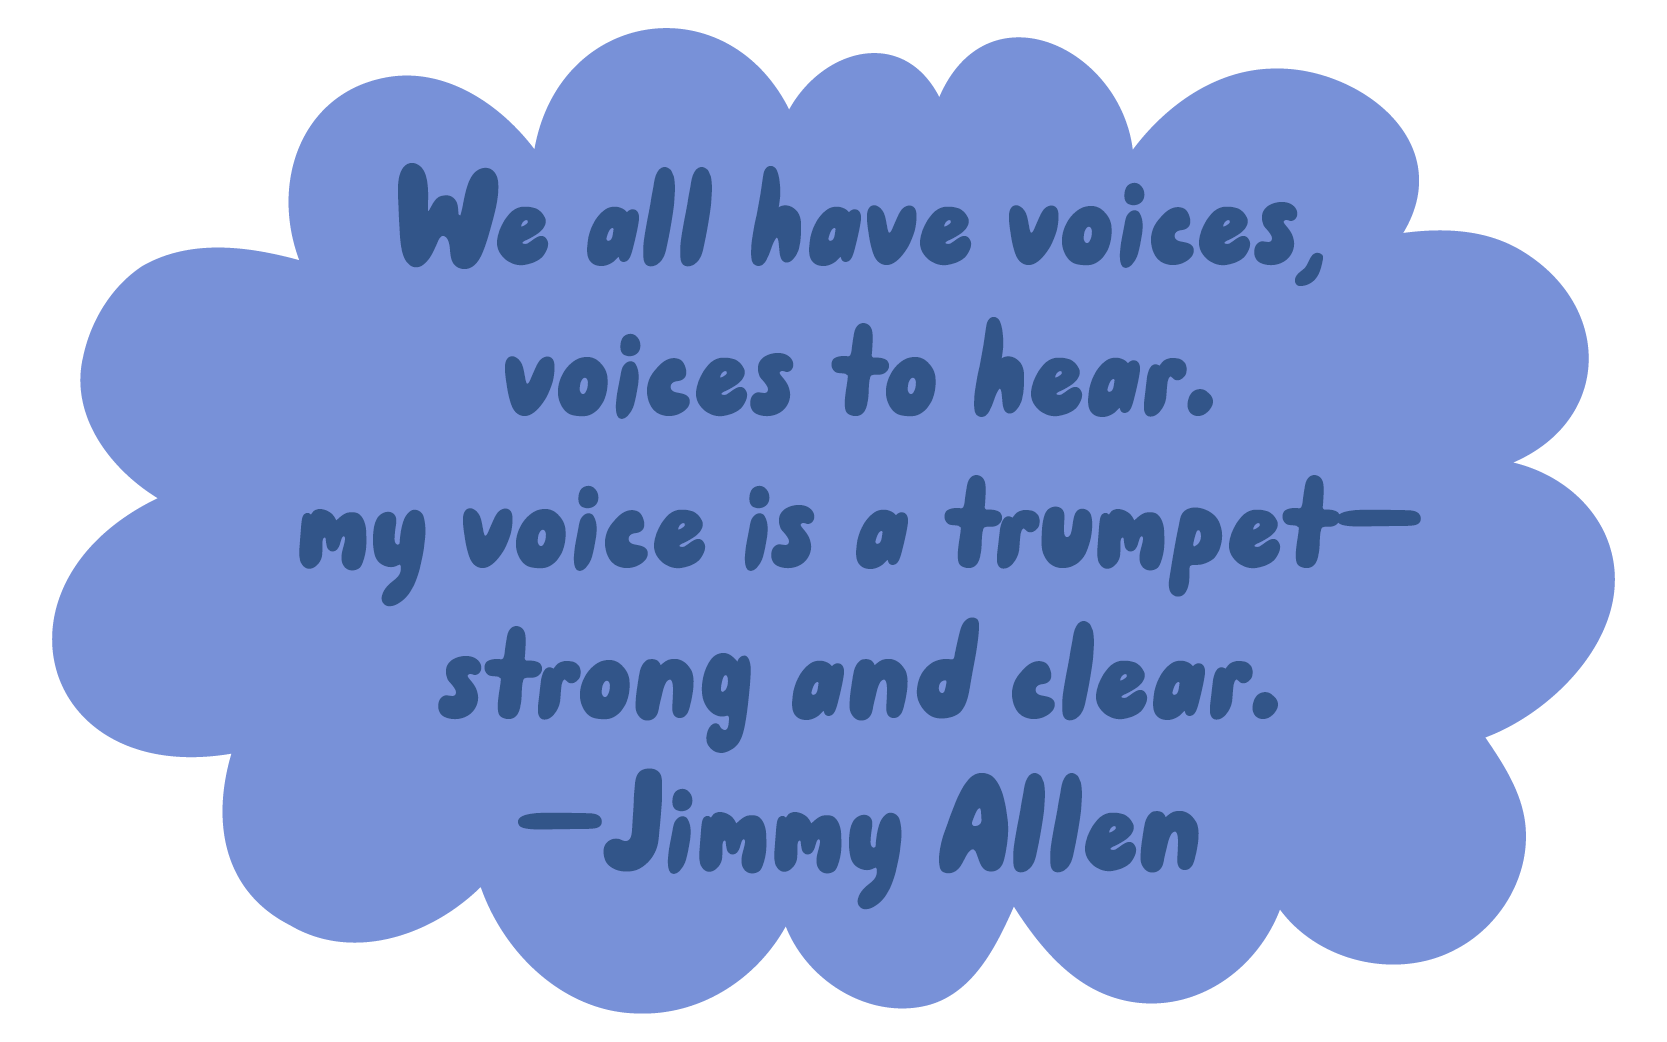 We all have voices, voices to hear. My voice is a trumpet—strong and clear. —Jimmy Allen